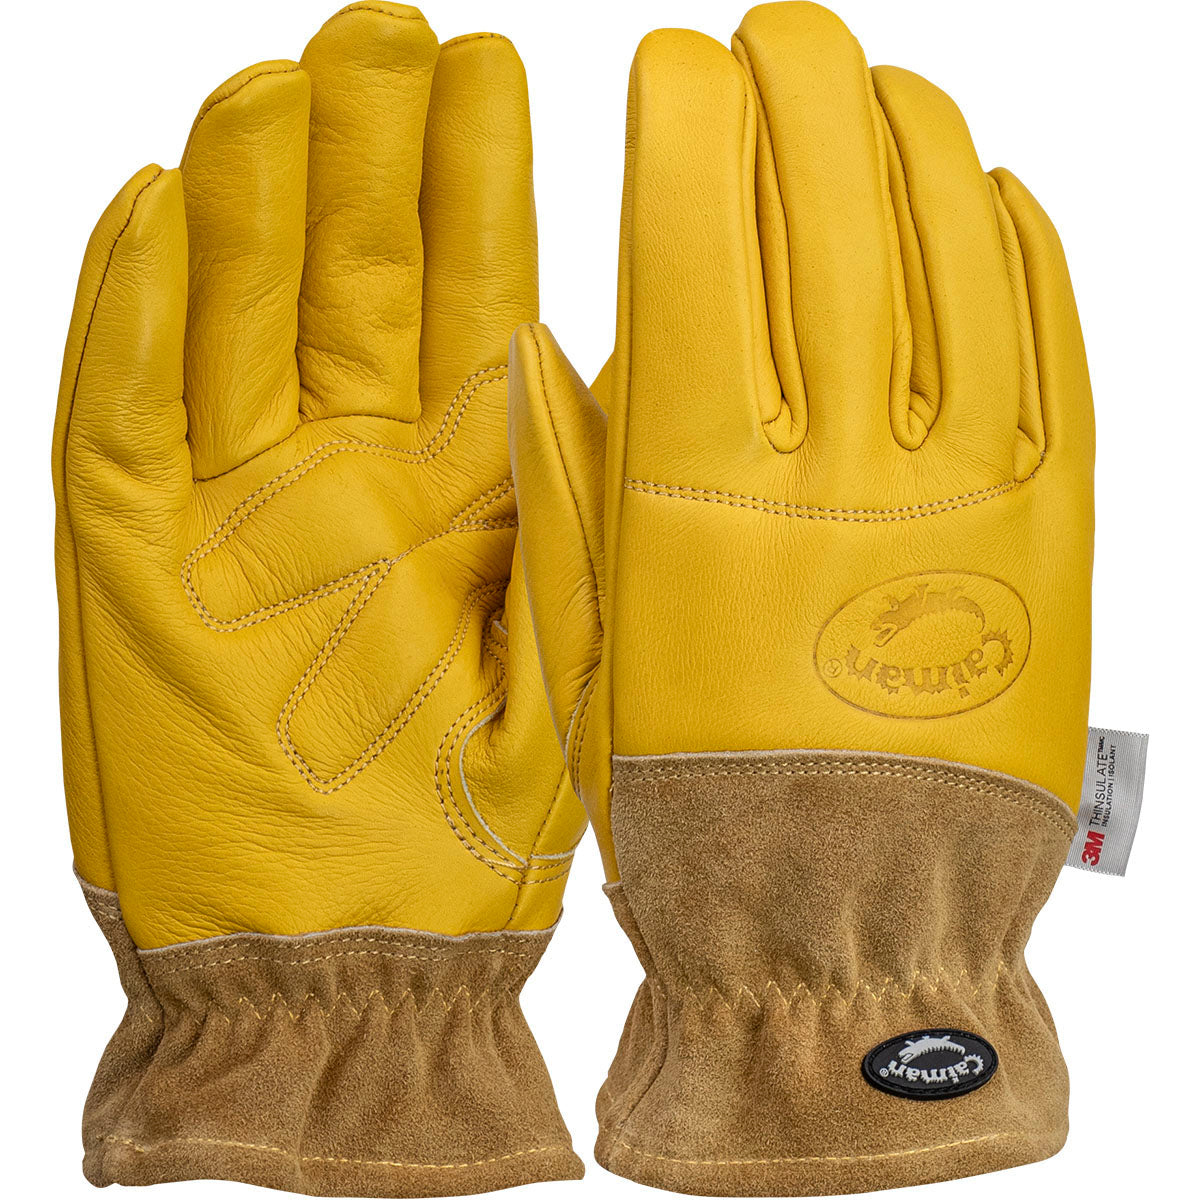 Caiman Premium Cowhide Leather Thinsulate Lined Winter Driver's Glove